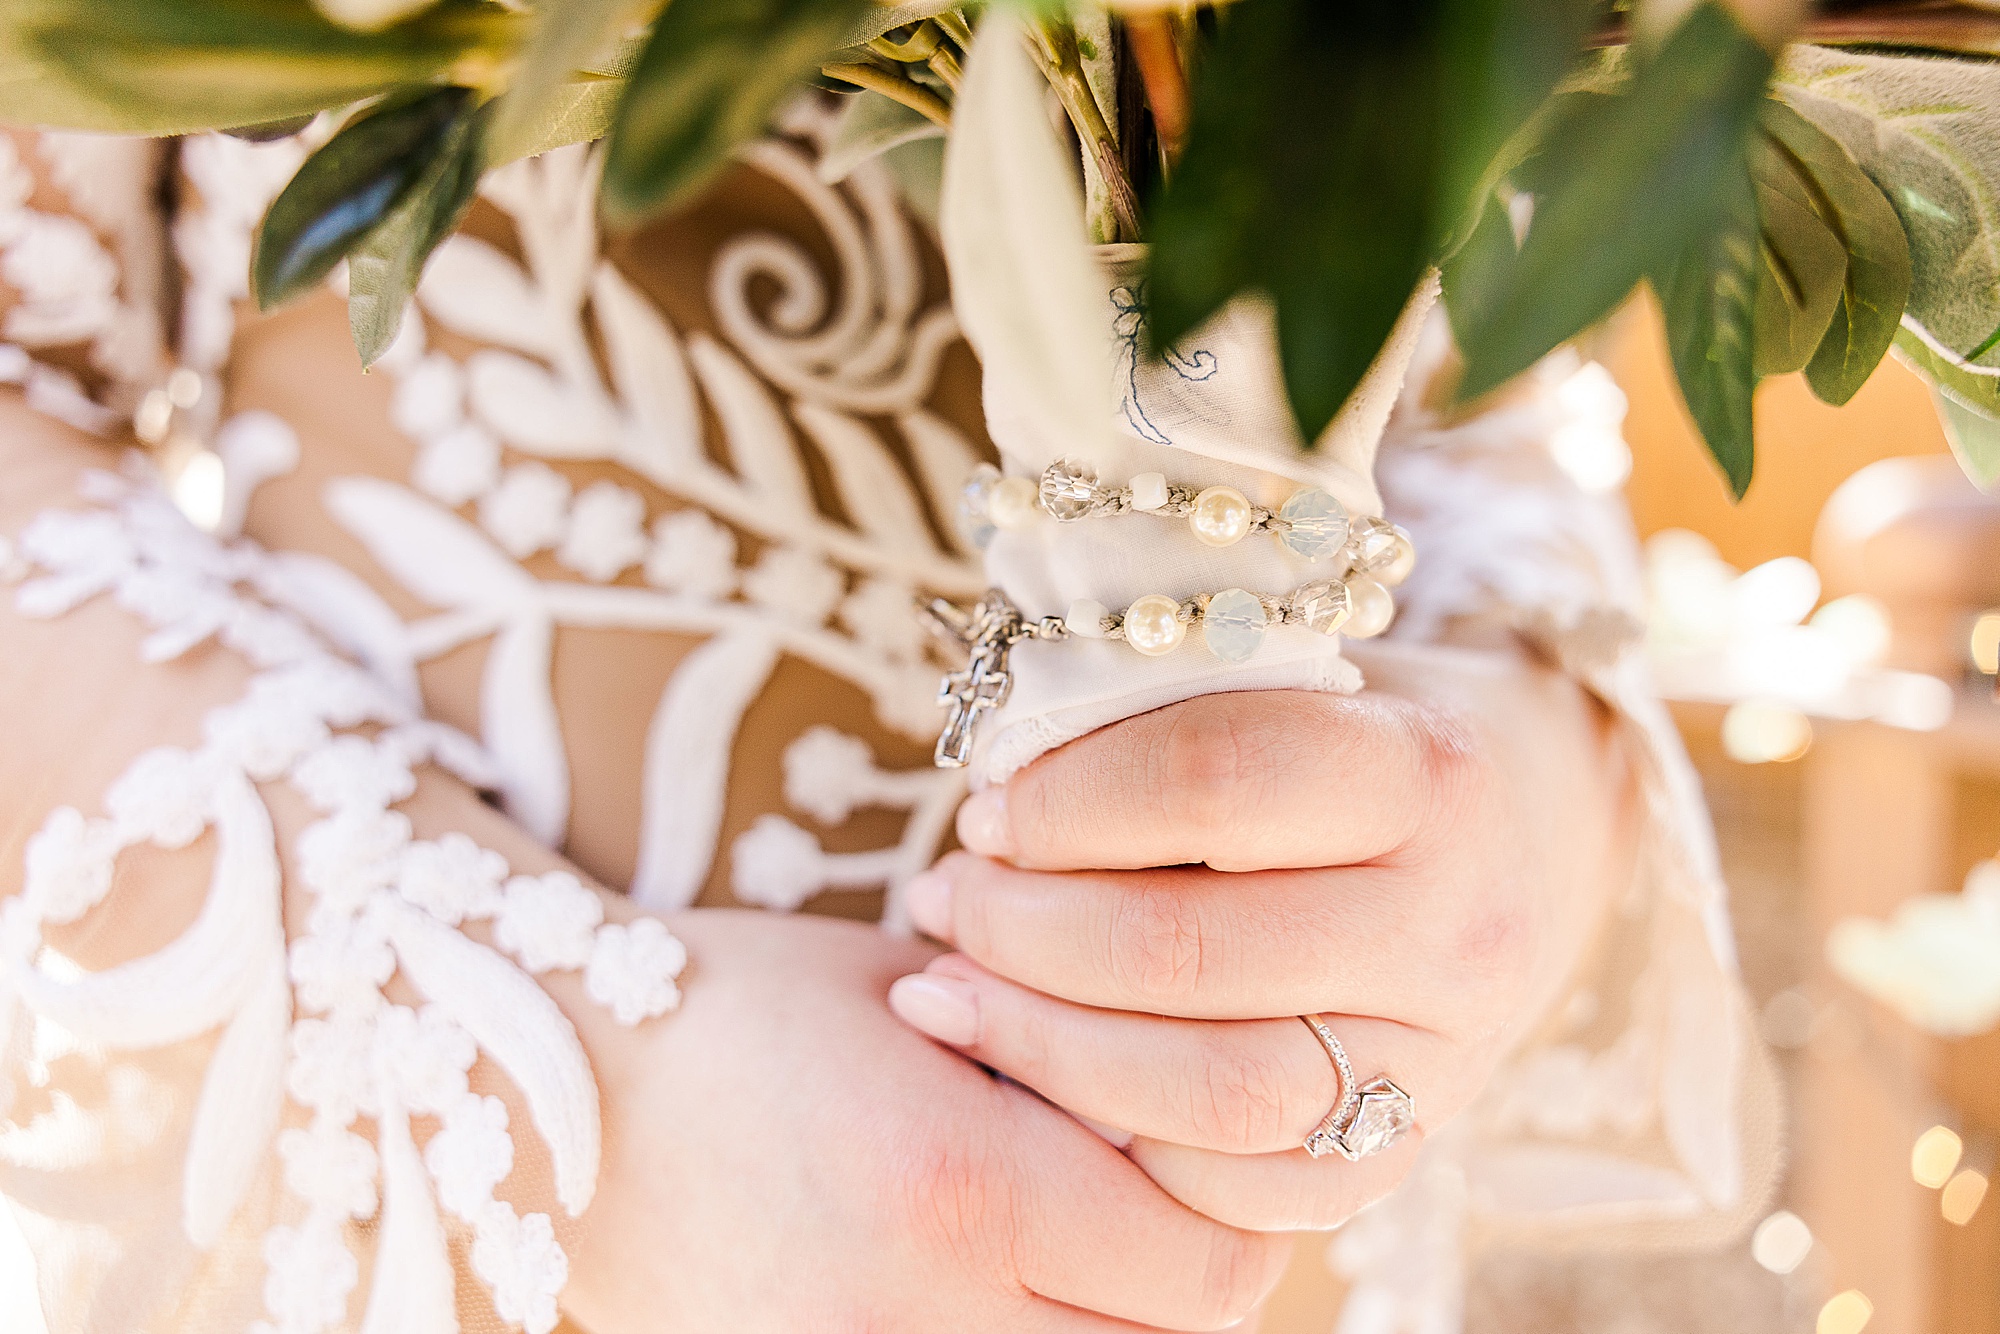 bride holds bouquet with pearls around stems